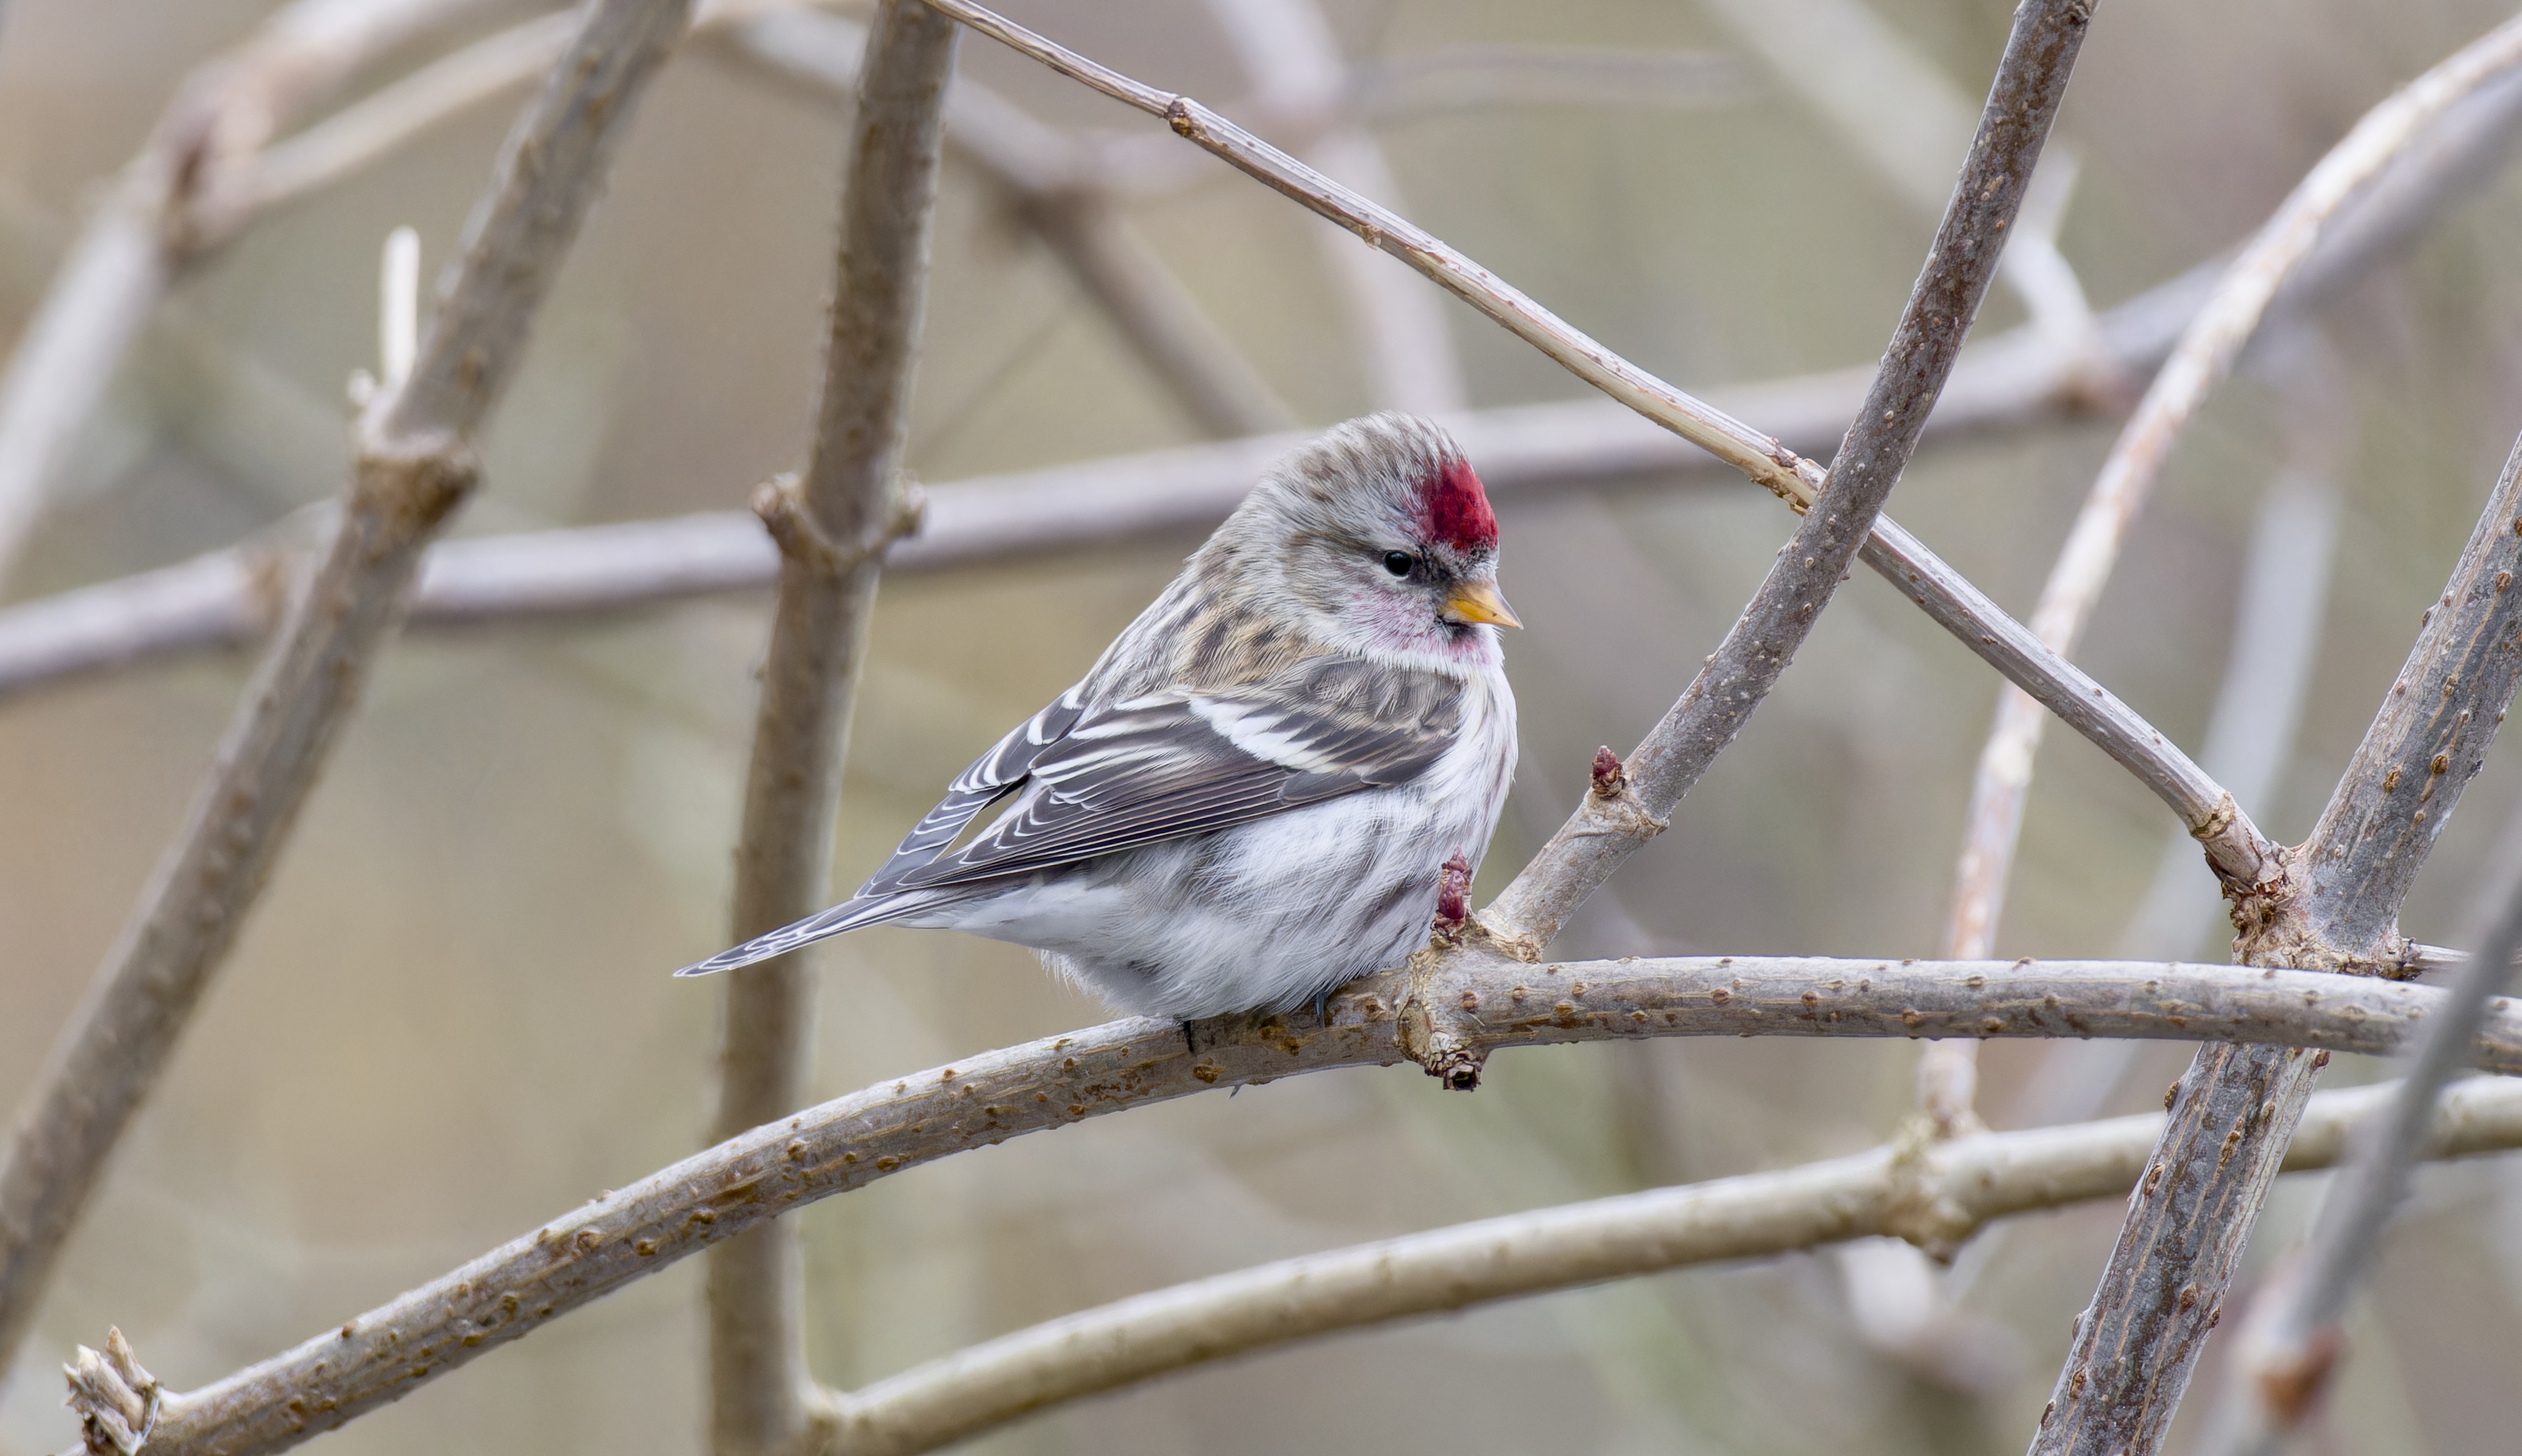 The first new lifer of the year - Common Redpoll!